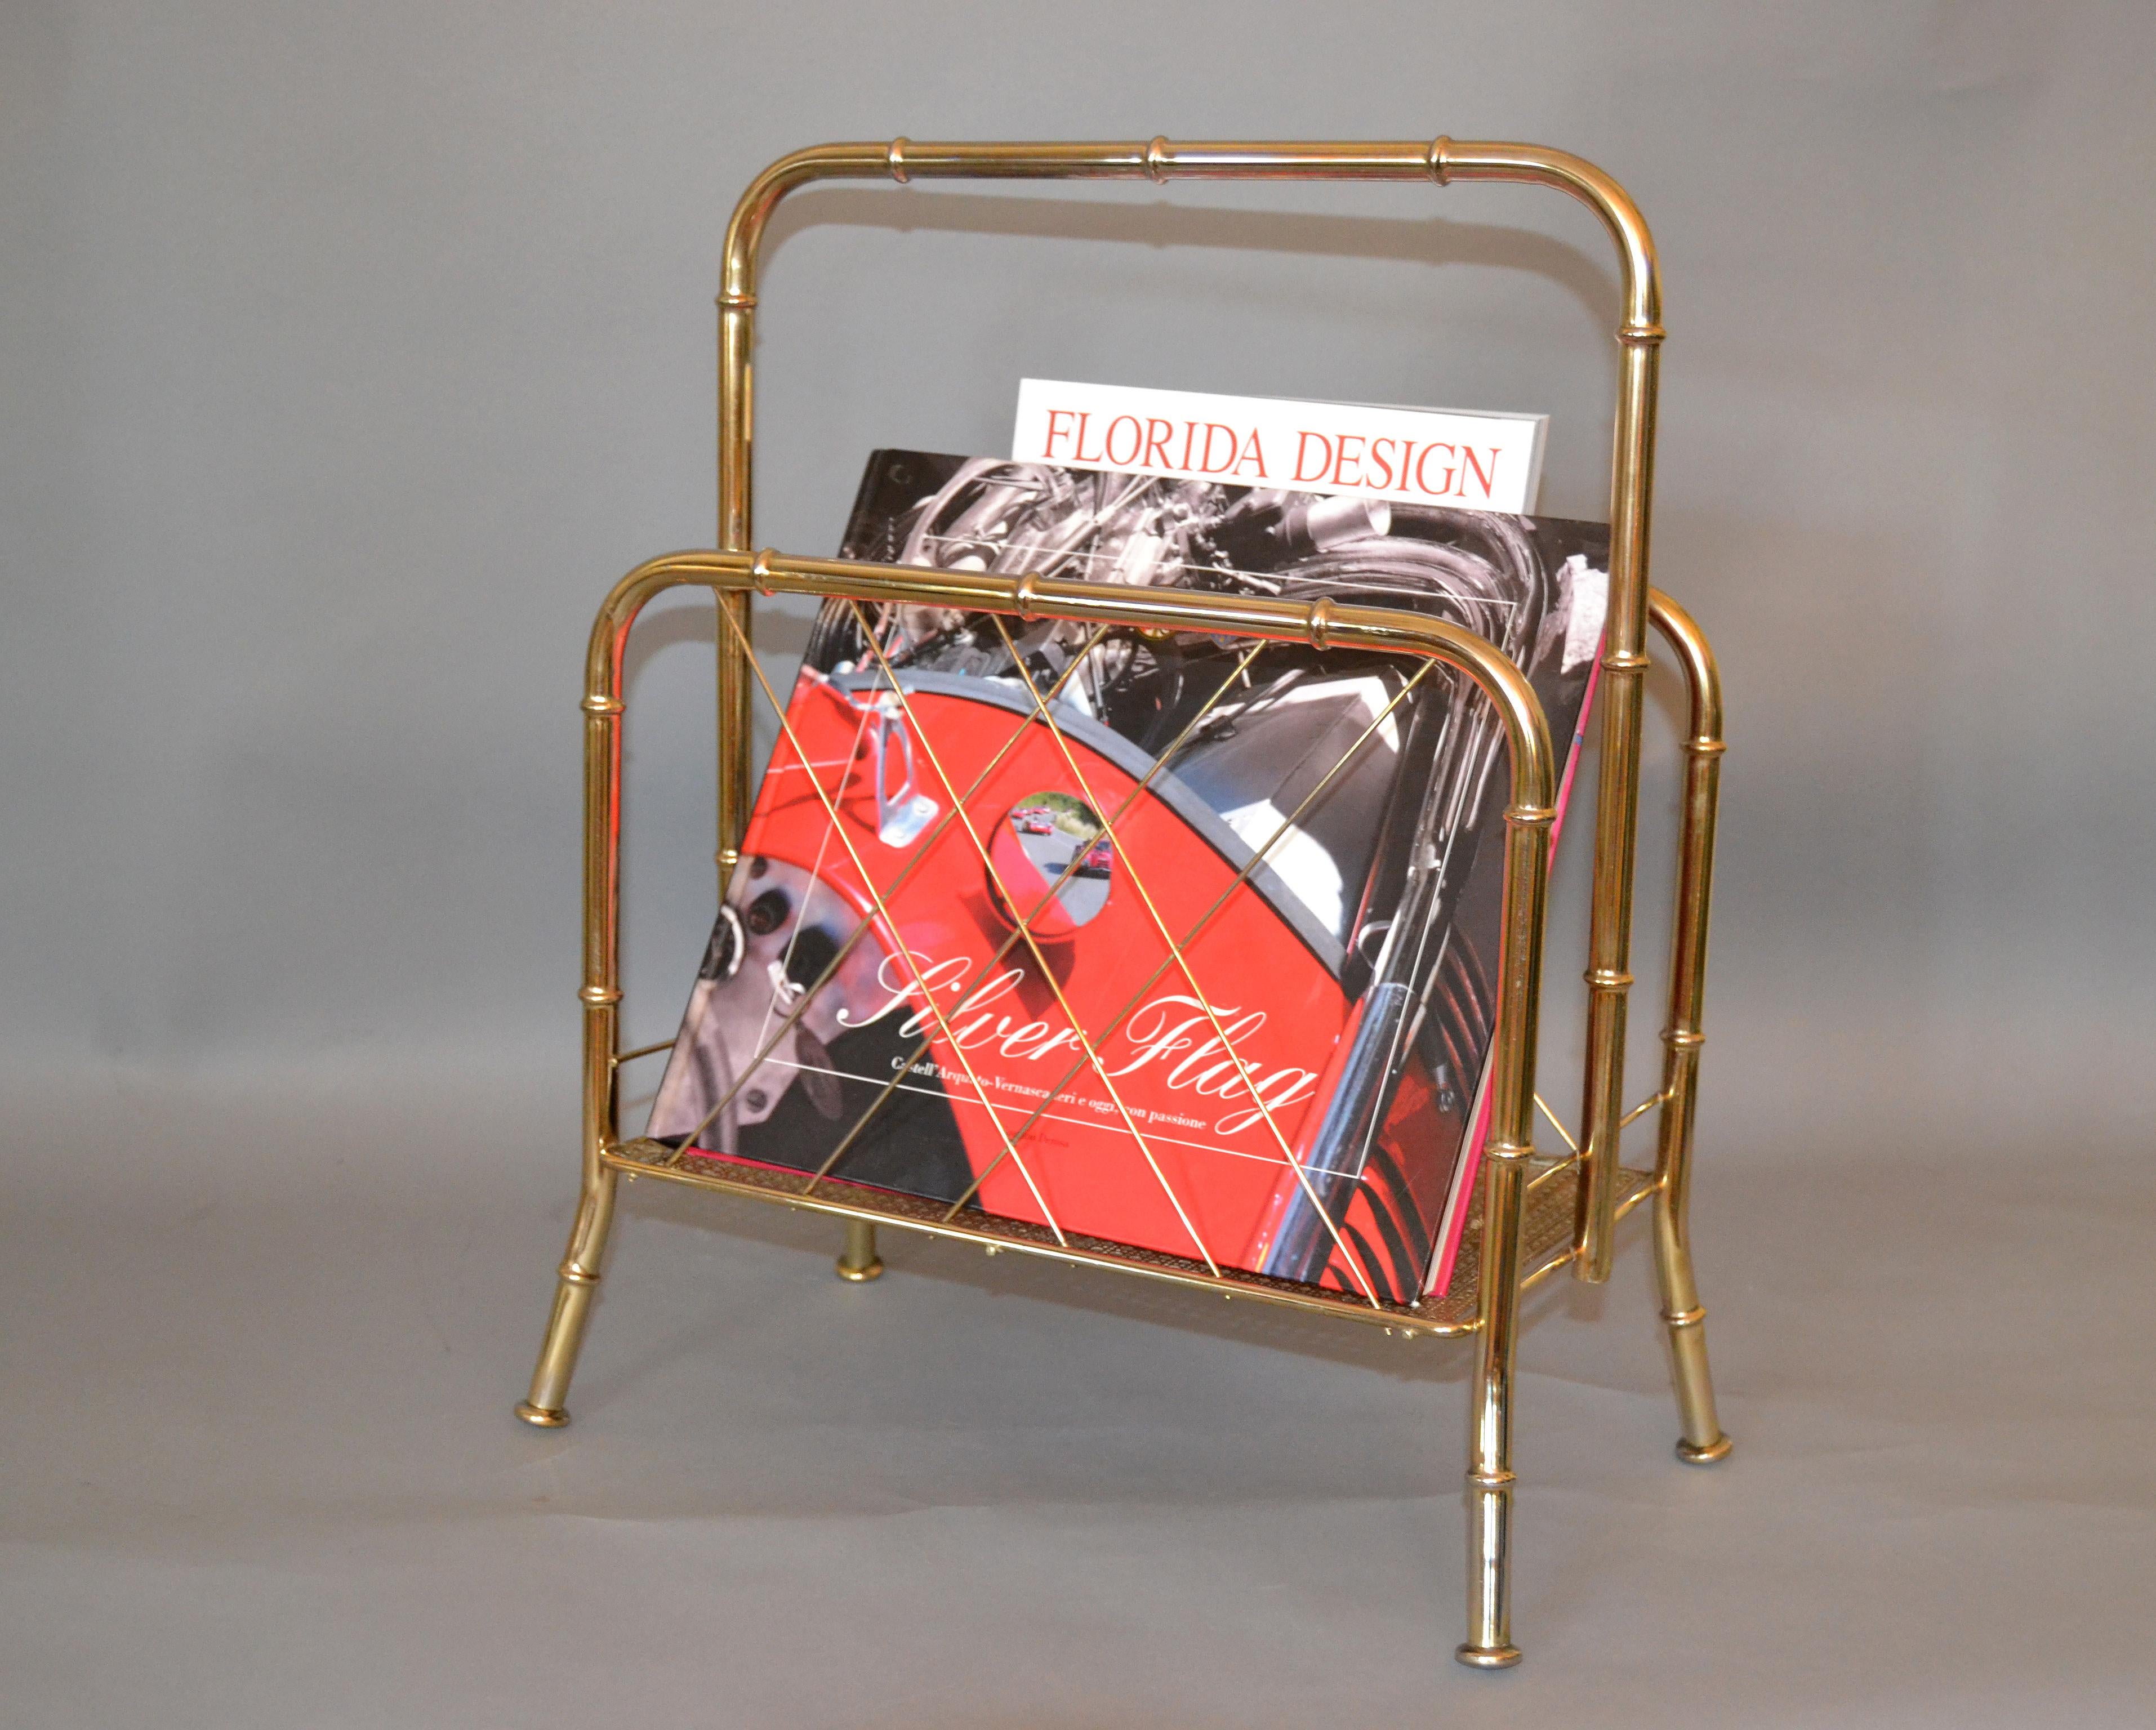 Hollywood Regency faux brass bamboo and cane magazine rack.
The magazine and book is just for decoration.
Simply lovely.